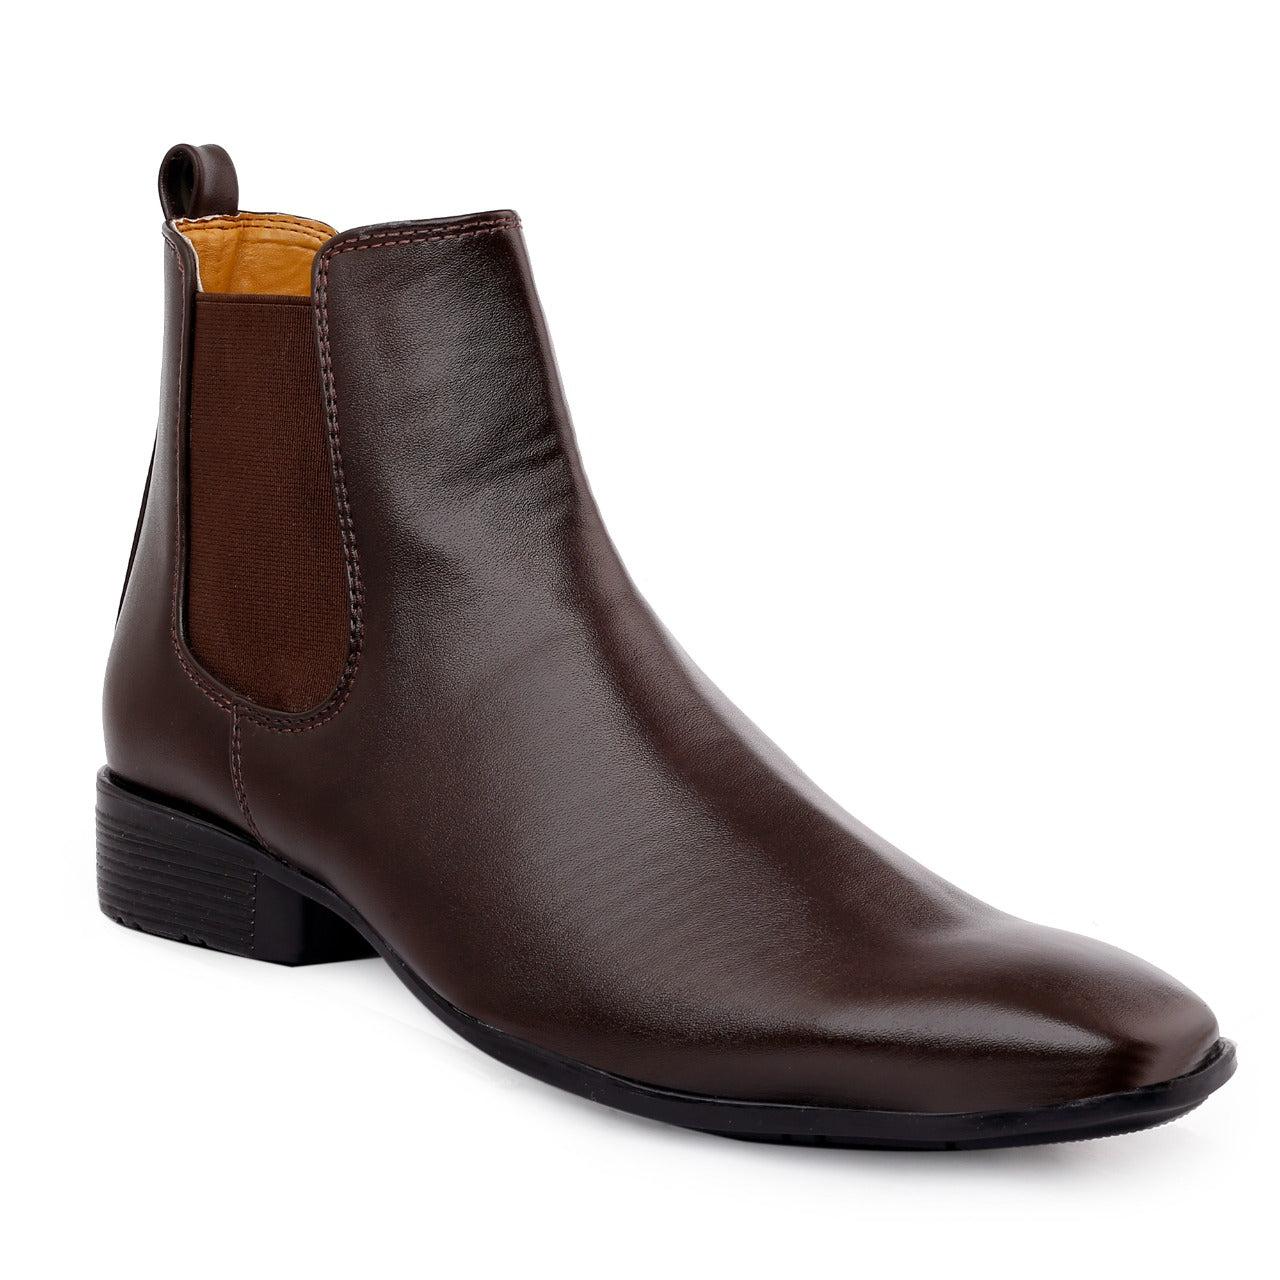 New Men's Stylish Formal and Casual Wear British Chelsea Ankle Boots